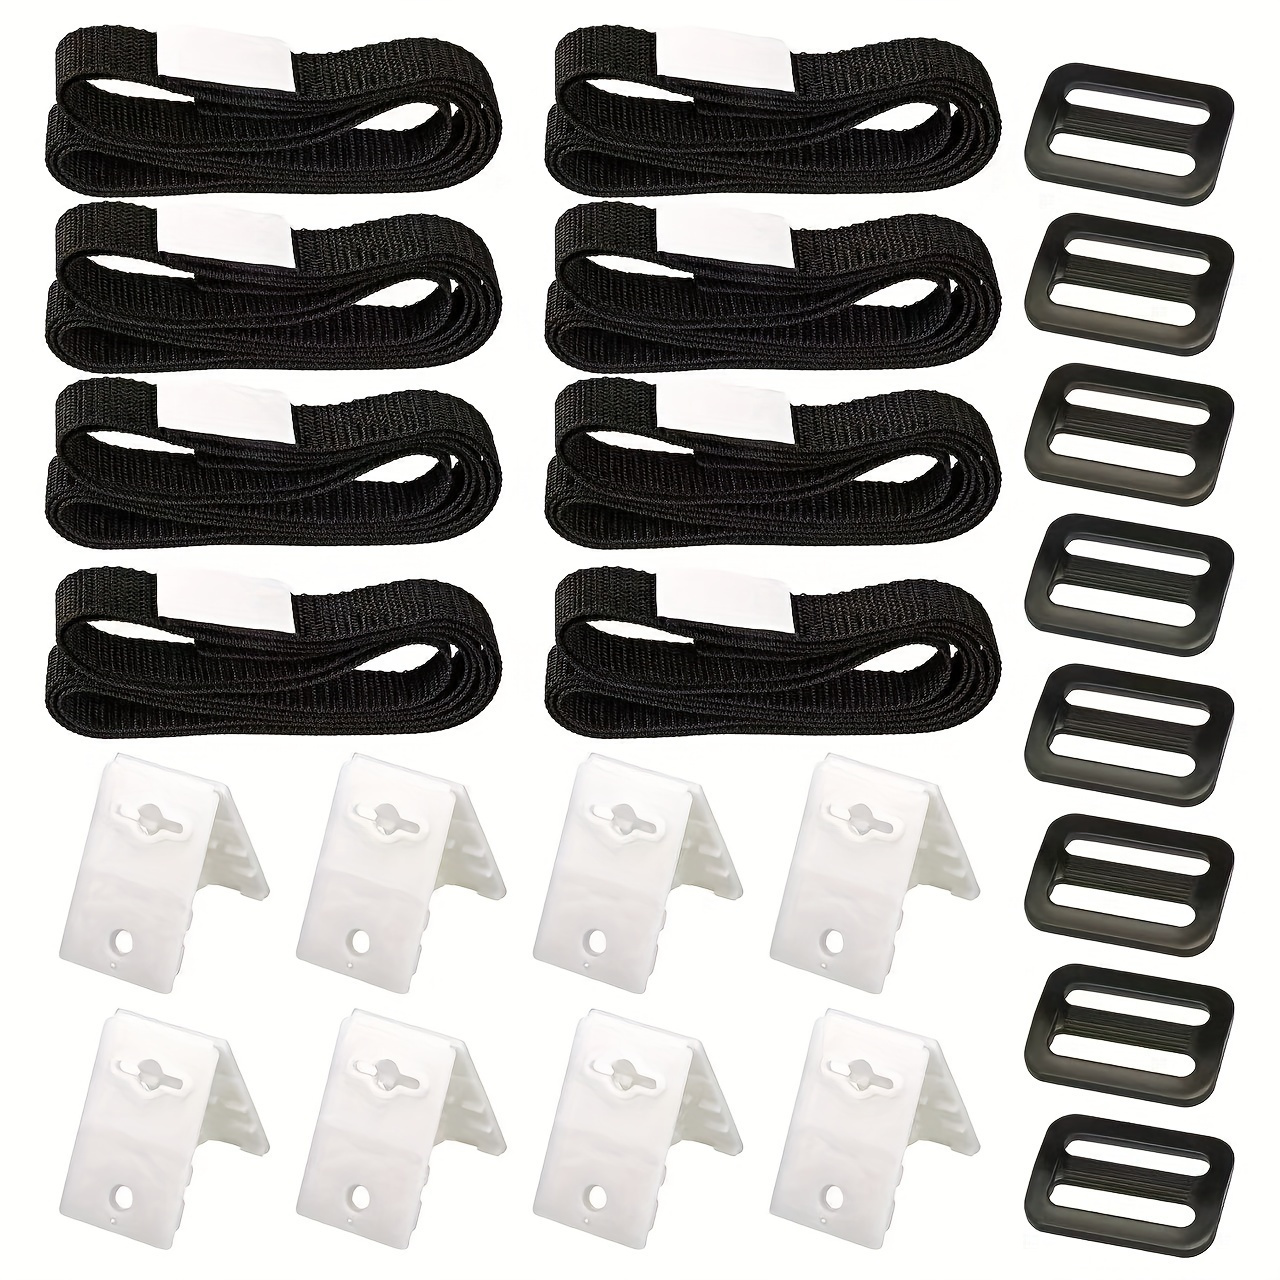 

1set Solar Cover Reel Attachment Kit, Including 8 Straps & Fastener Tabs, 8 Cord Plates, 8 Buckles